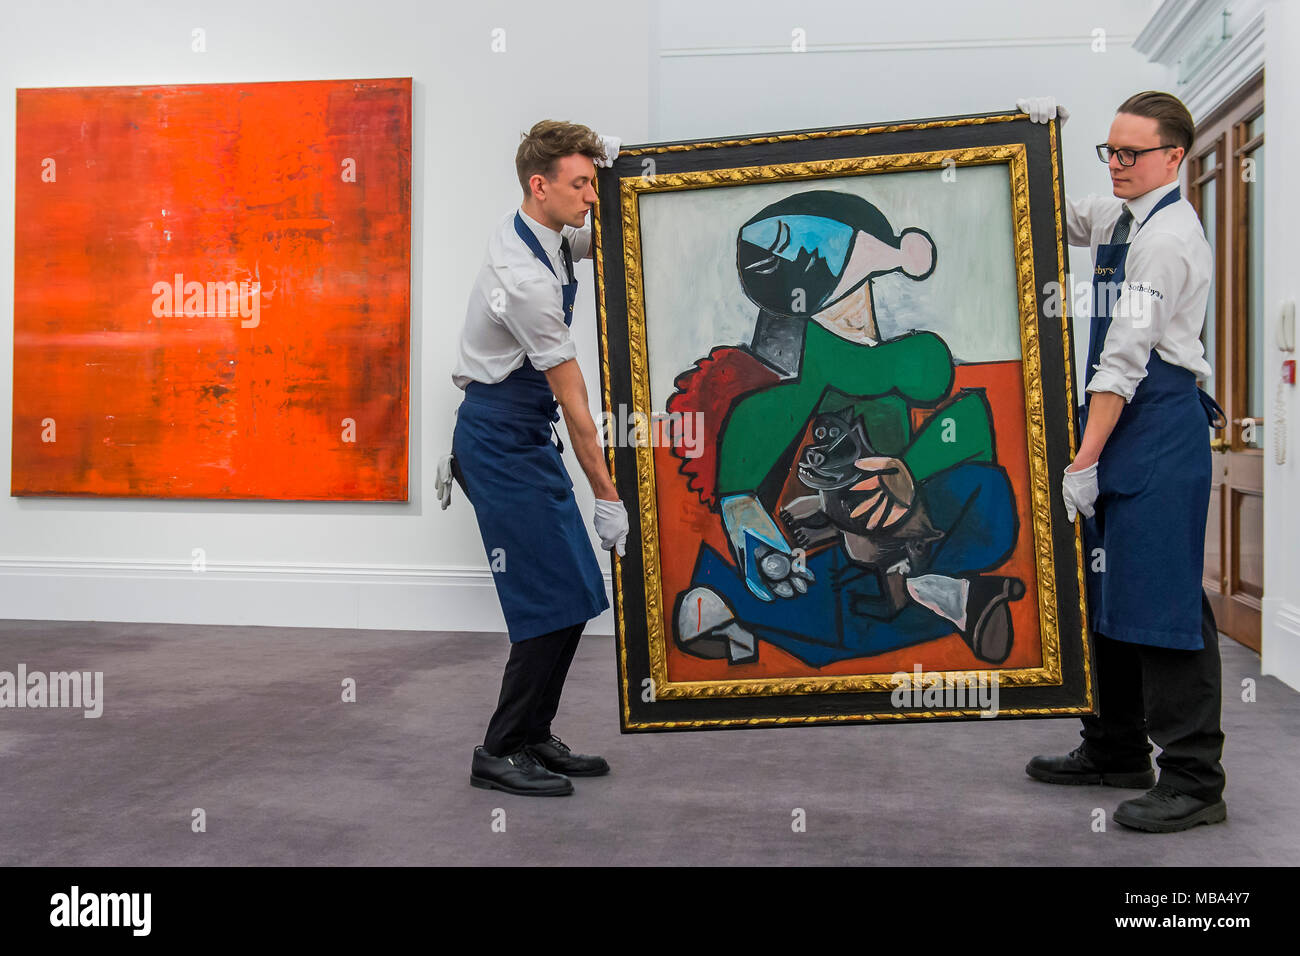 London, UK. 9th April, 2018. Abstraktes Bild, 1991, by Gerhard Richter and Femme au Chien, Pablo Picasso, est $12-18m  - Highlights of Sotheby's Contemporary, Impressionist & Modern Art on dispaly at New Bond Street, London. Credit: Guy Bell/Alamy Live News Stock Photo